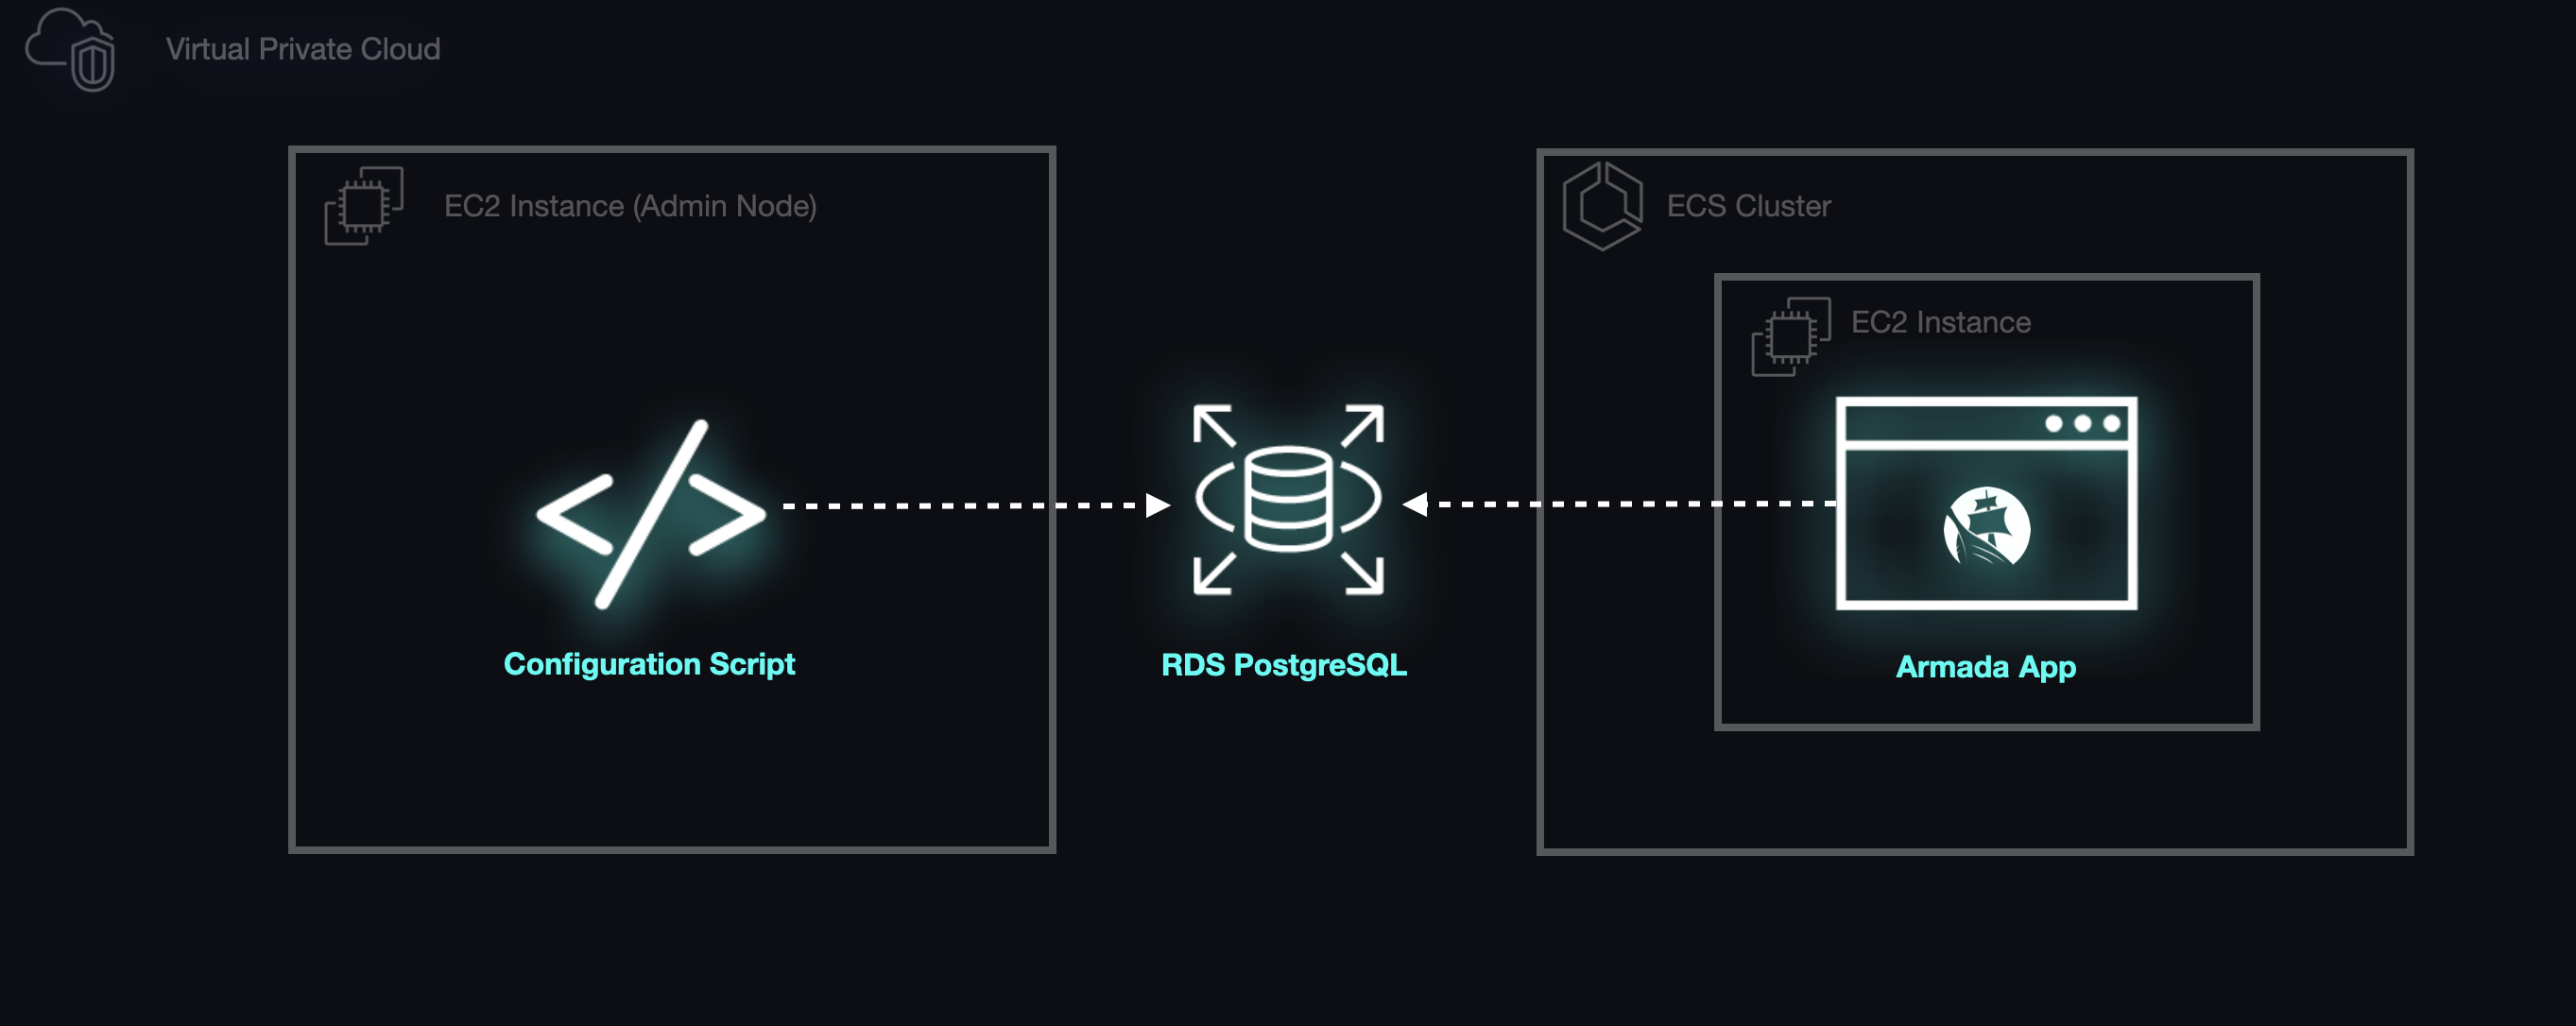 An architecture diagram showing the RDS instance being configured by the Admin Node.